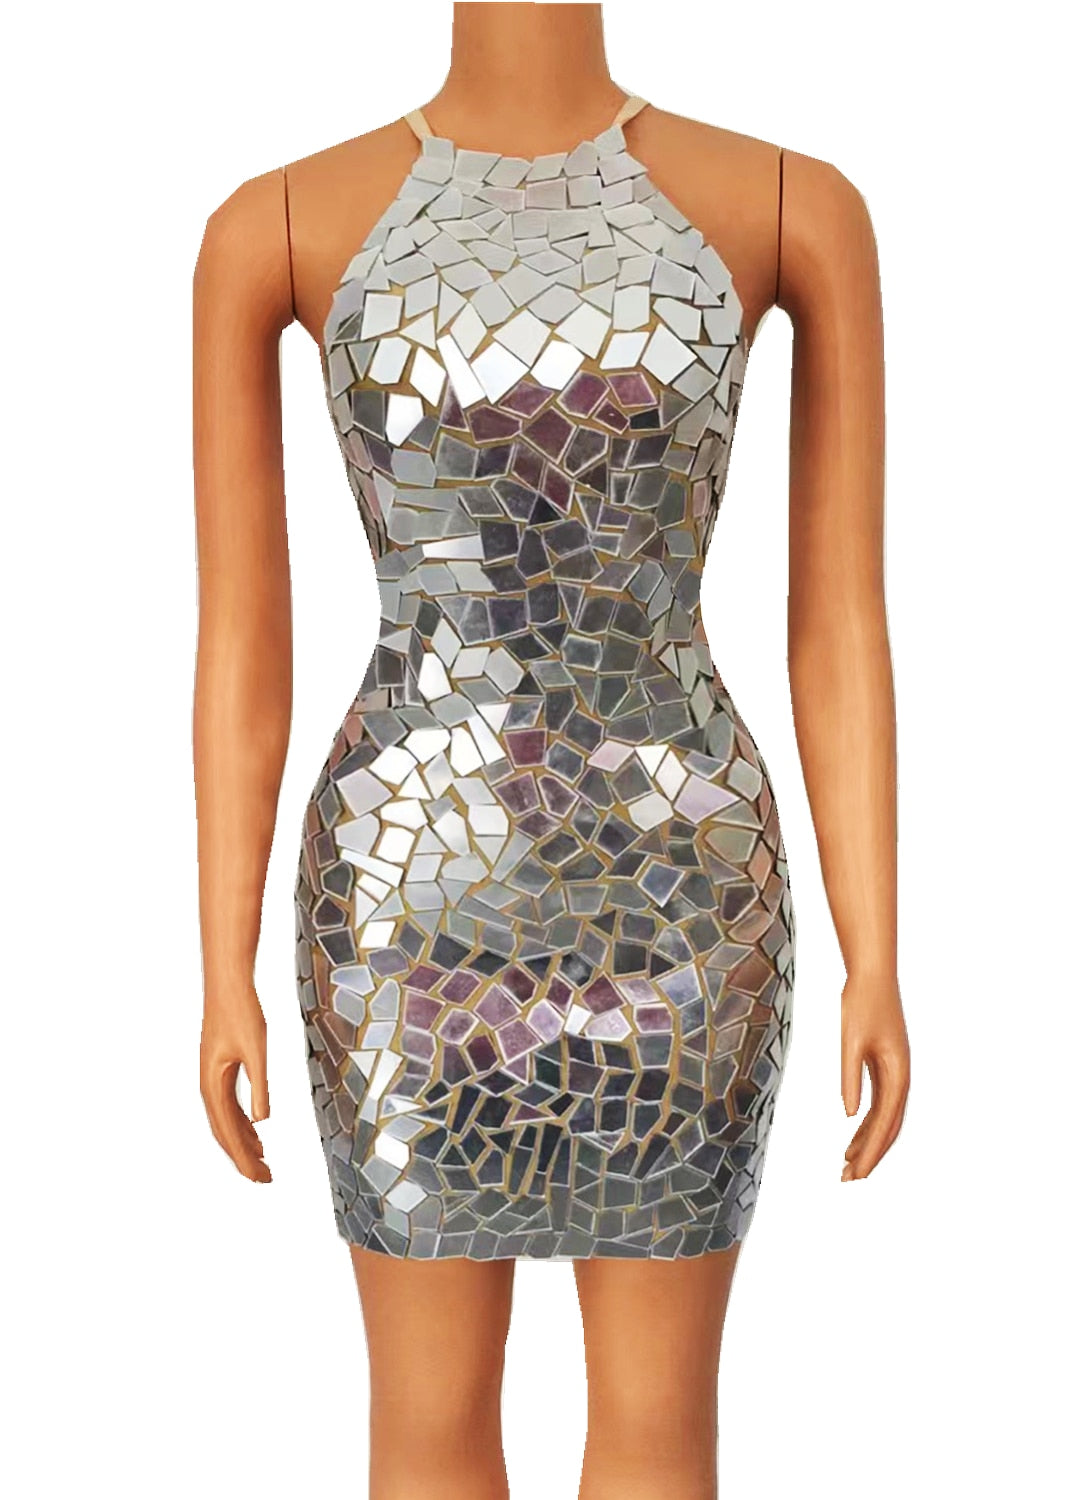 Sparkly Silver Mirrors Sleeveless Dress Evening Birthday Celebrate Outfit Party Sexy Costume Dancer Performance Show Clothes